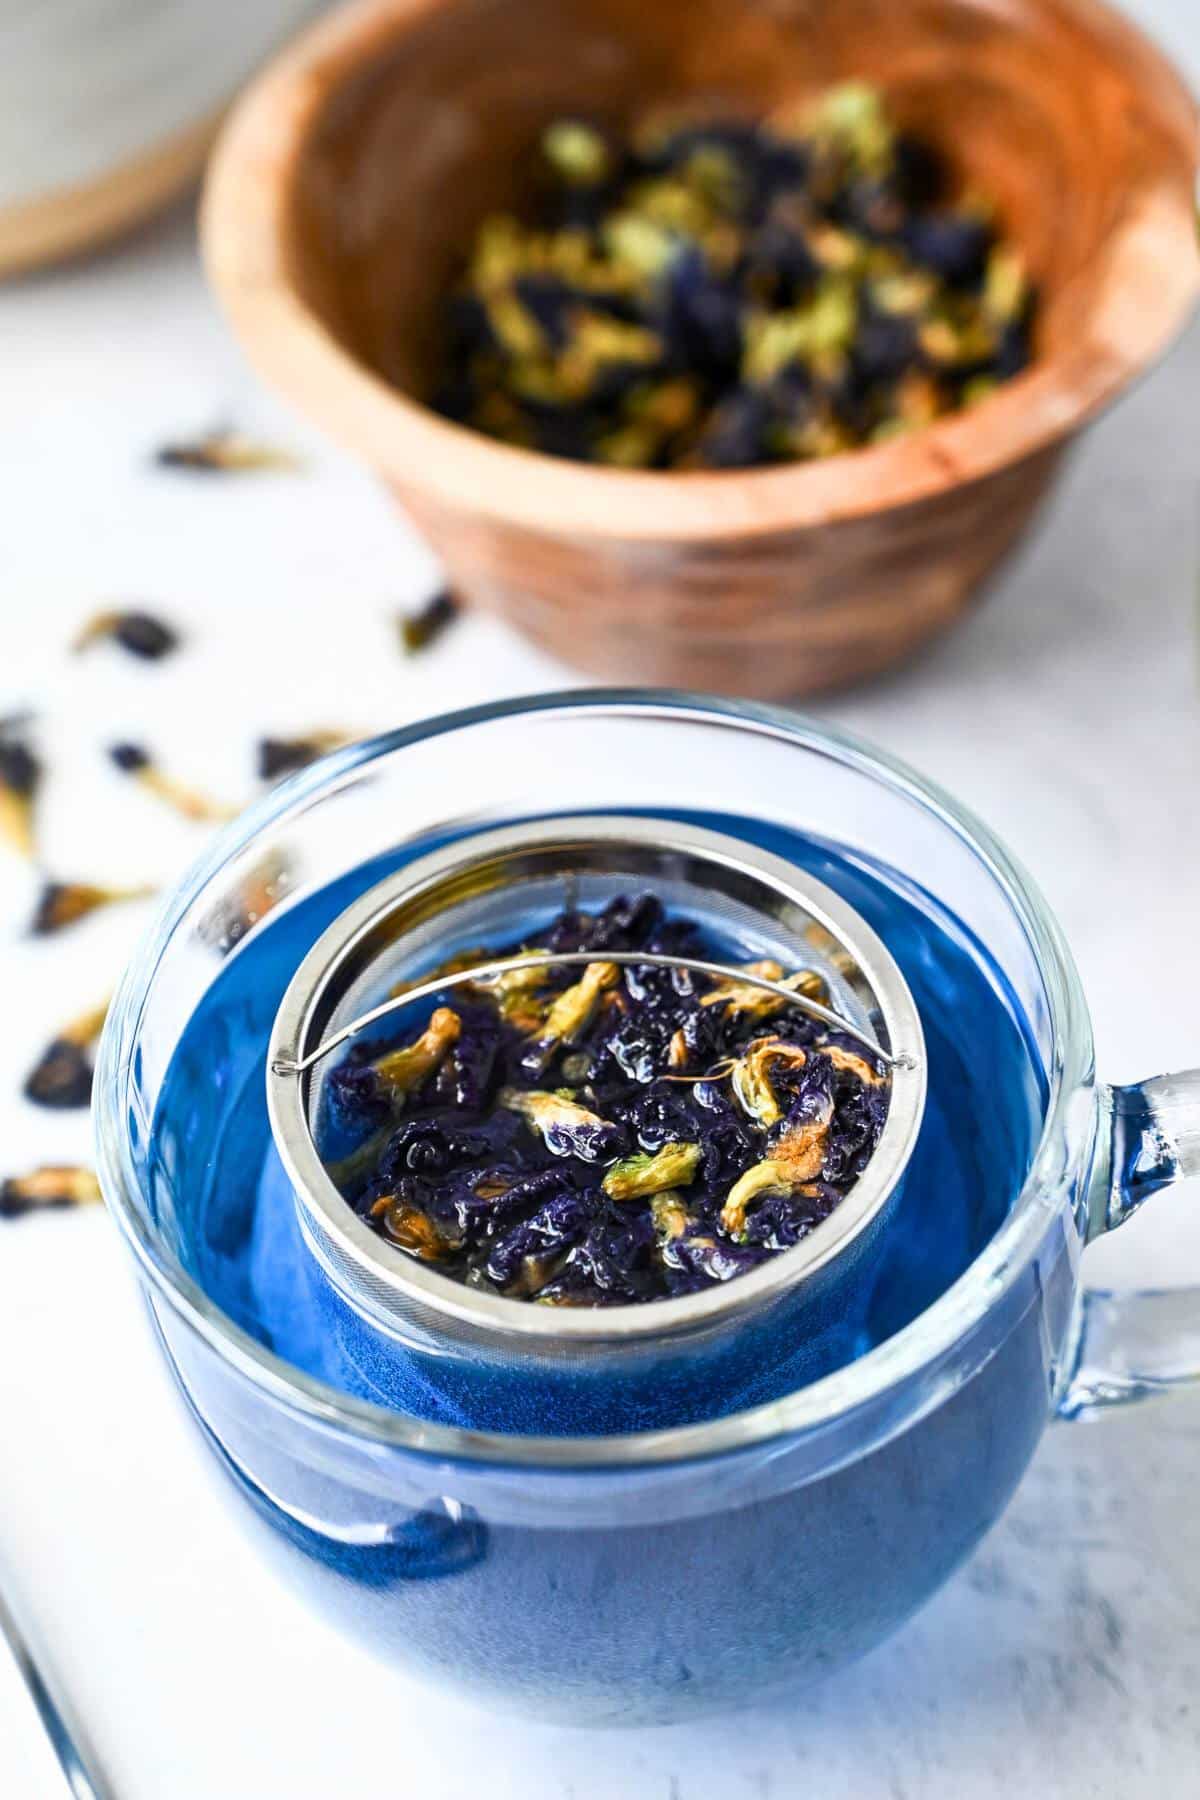 butterfly pea flower blossoms steeping in a glass mug in a tea strainer